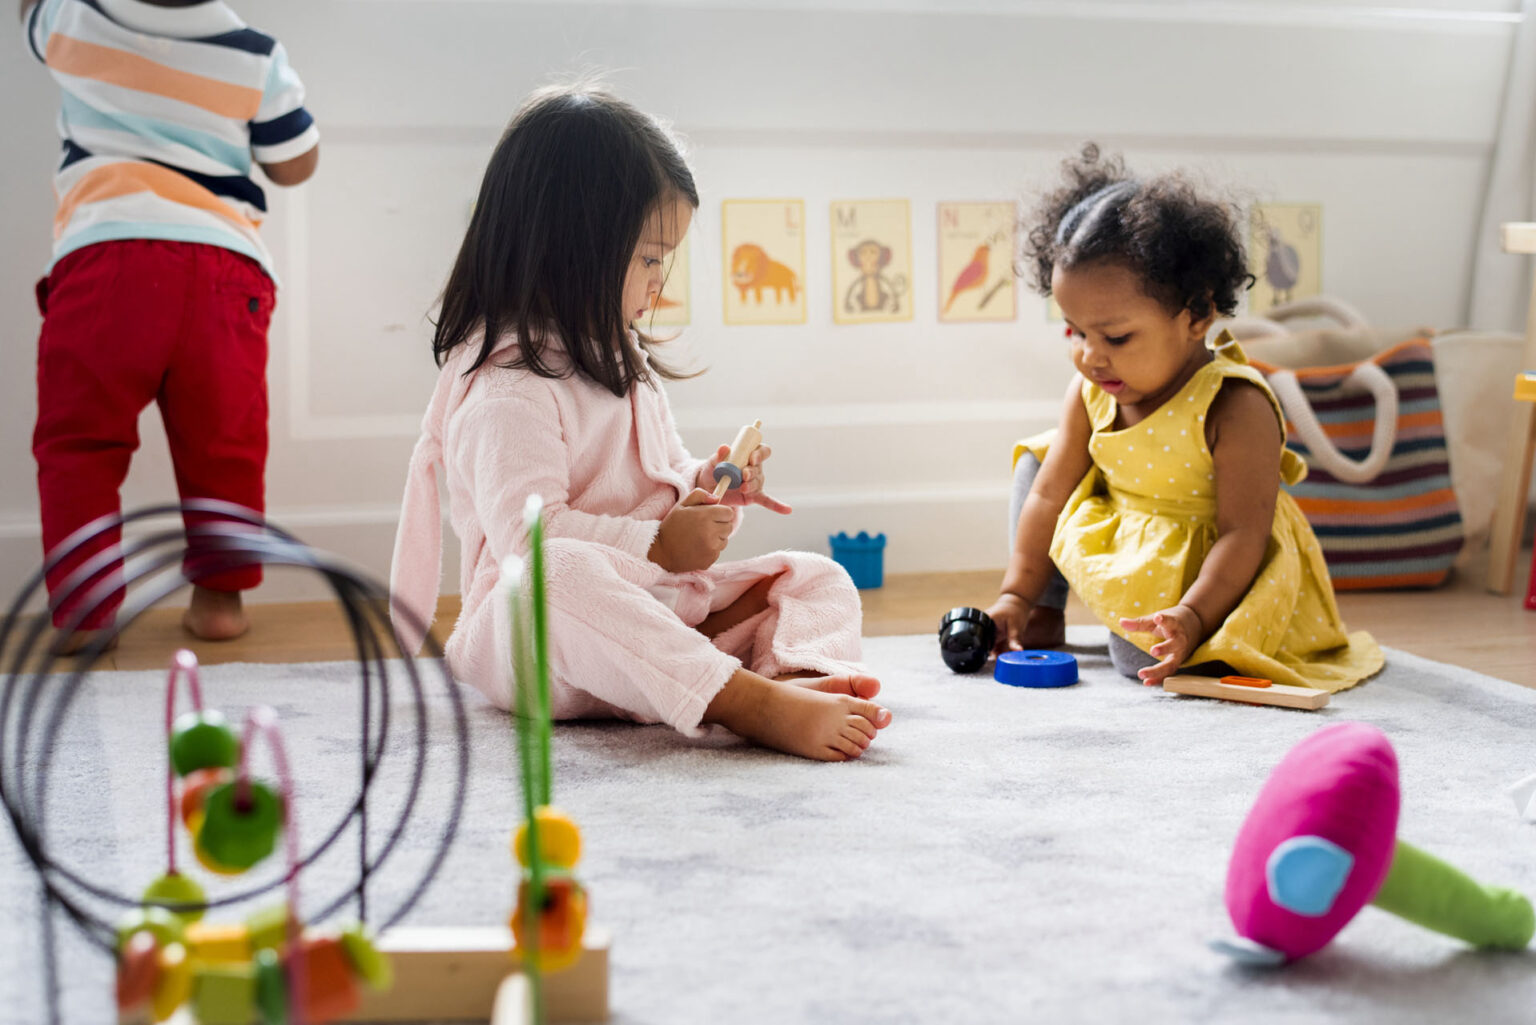 Of countless business options in franchising, you must consider daycare franchising. Here's why.